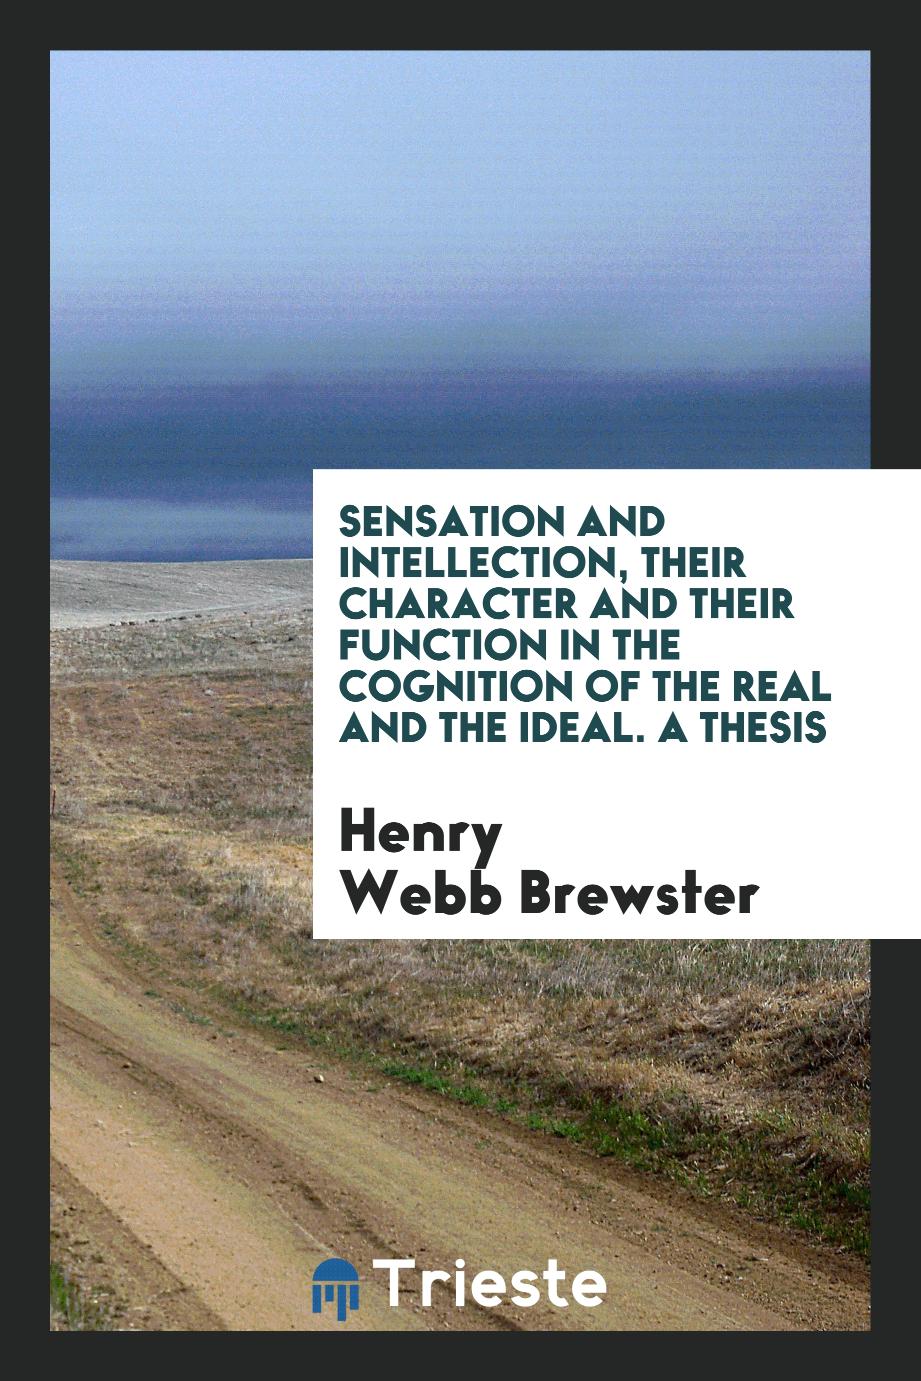 Sensation and Intellection, Their Character and Their Function in the Cognition of the Real and the Ideal. A Thesis